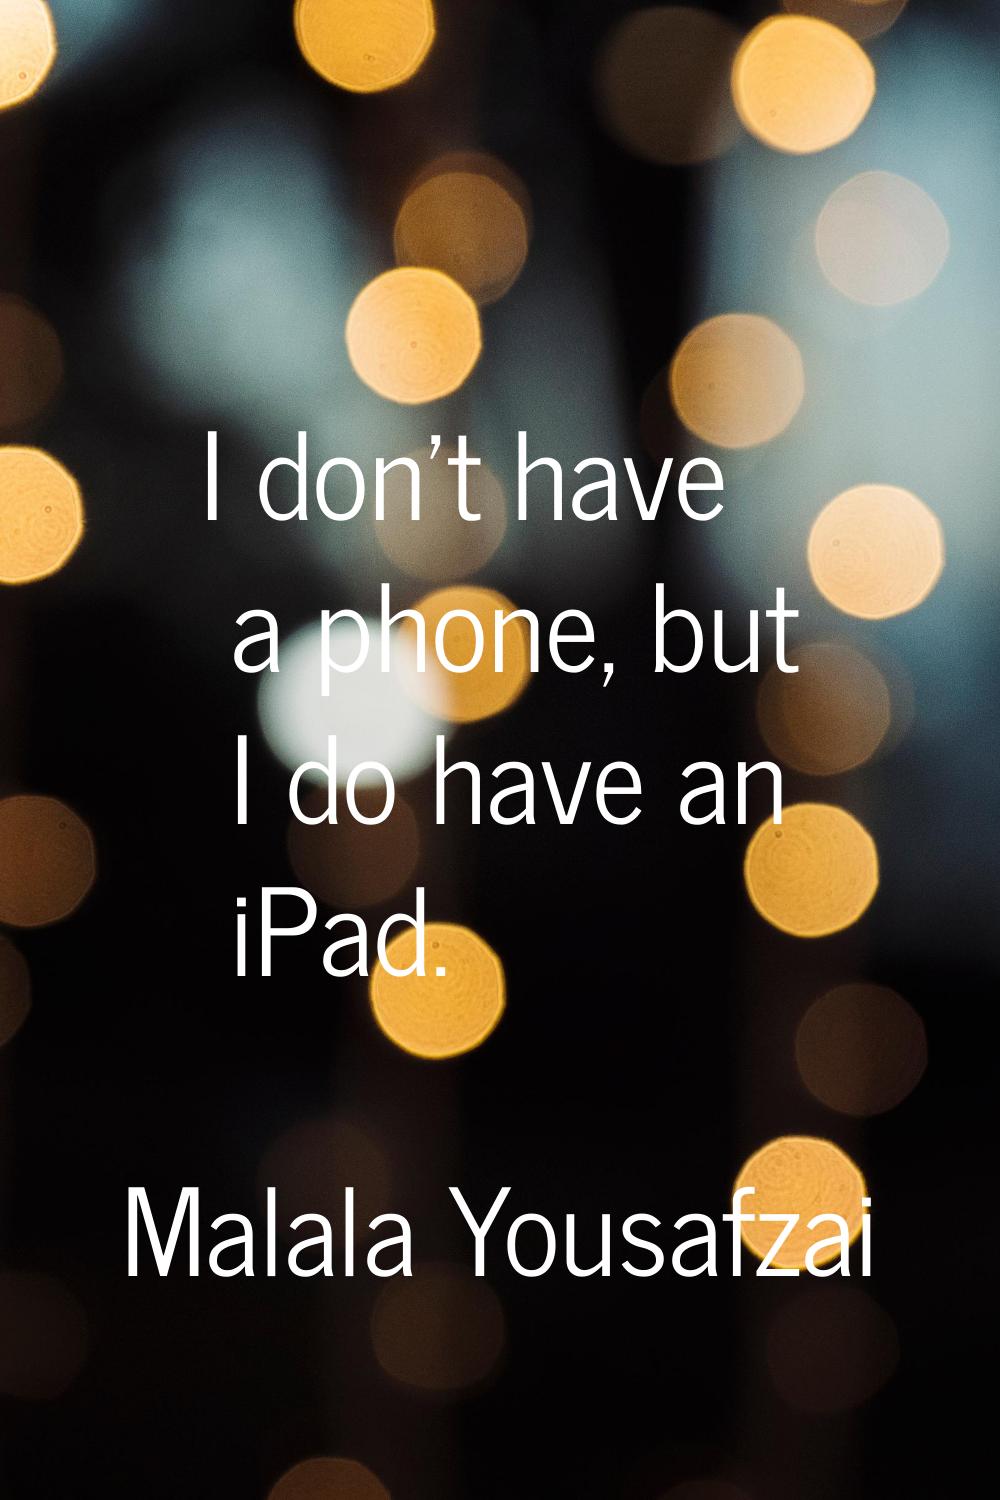 I don't have a phone, but I do have an iPad.